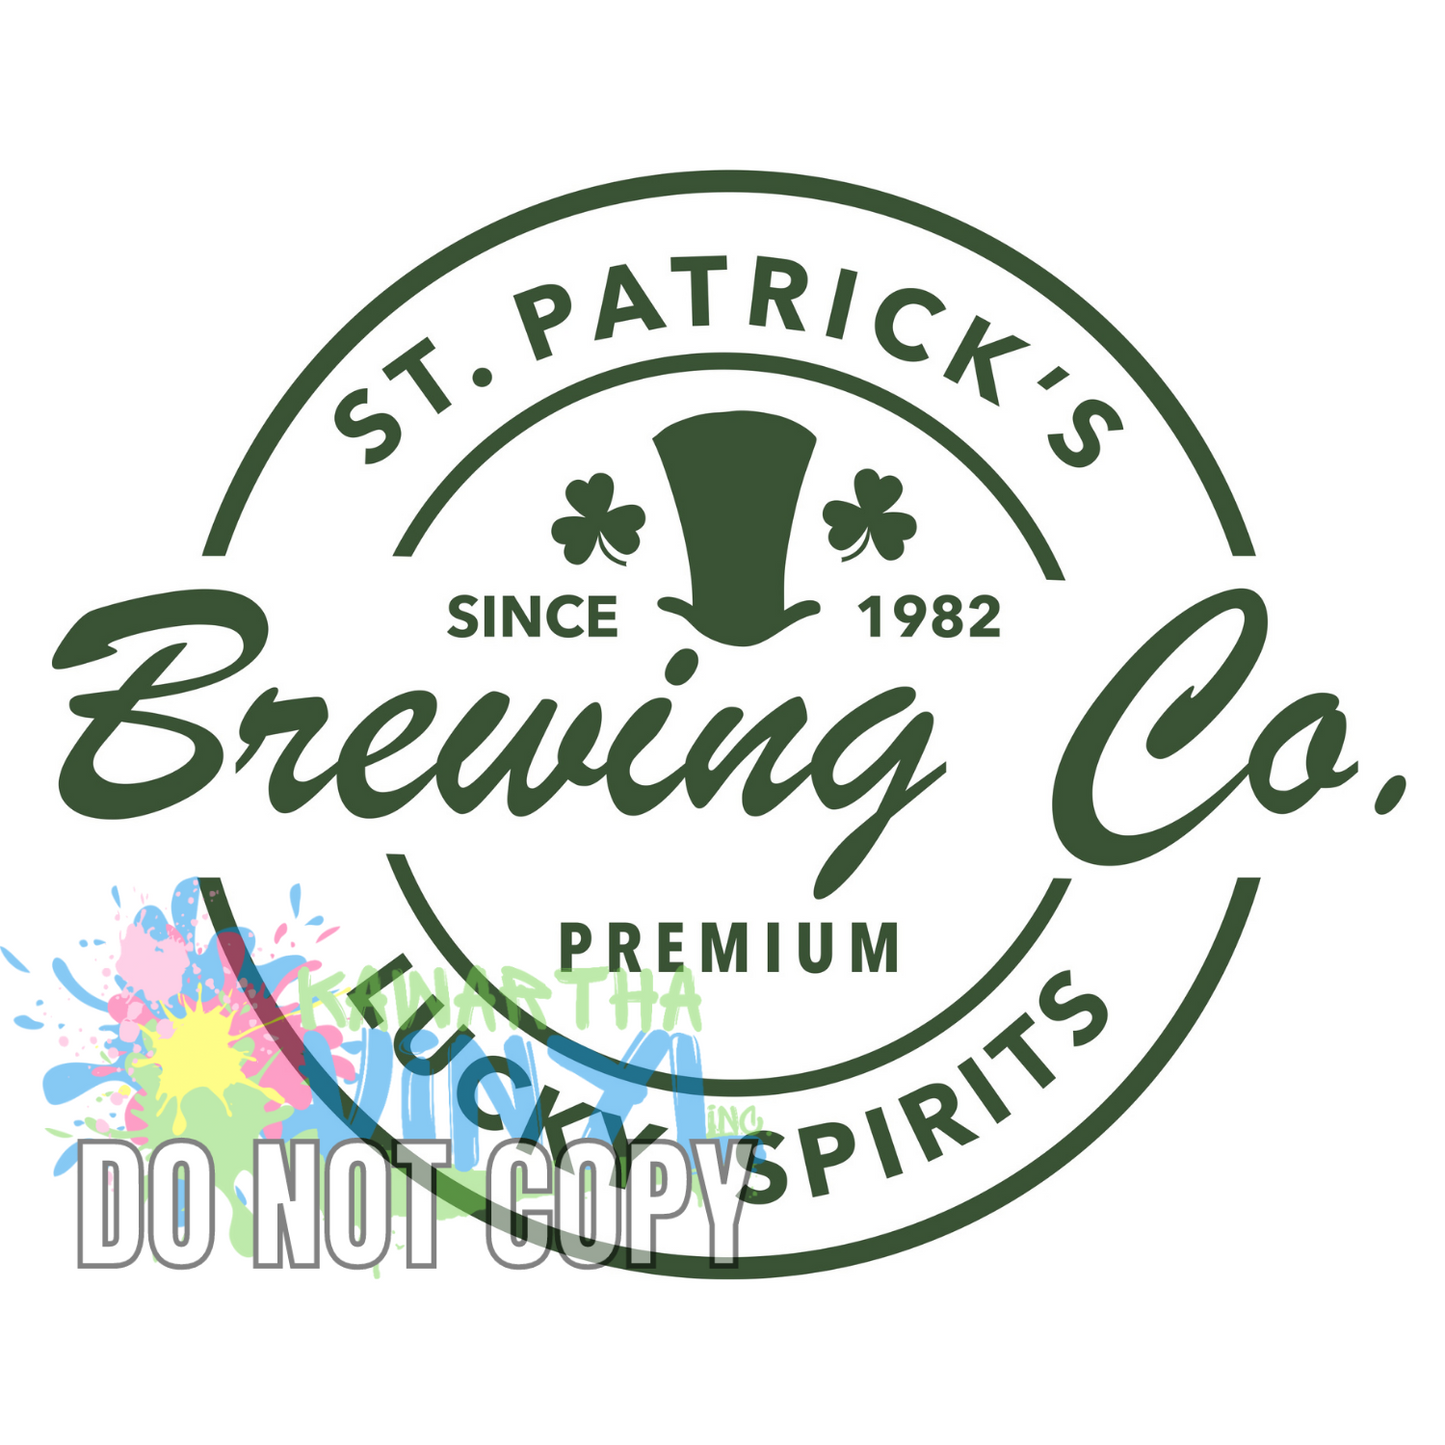 Brewing Co. St. Pats. Sublimation Print